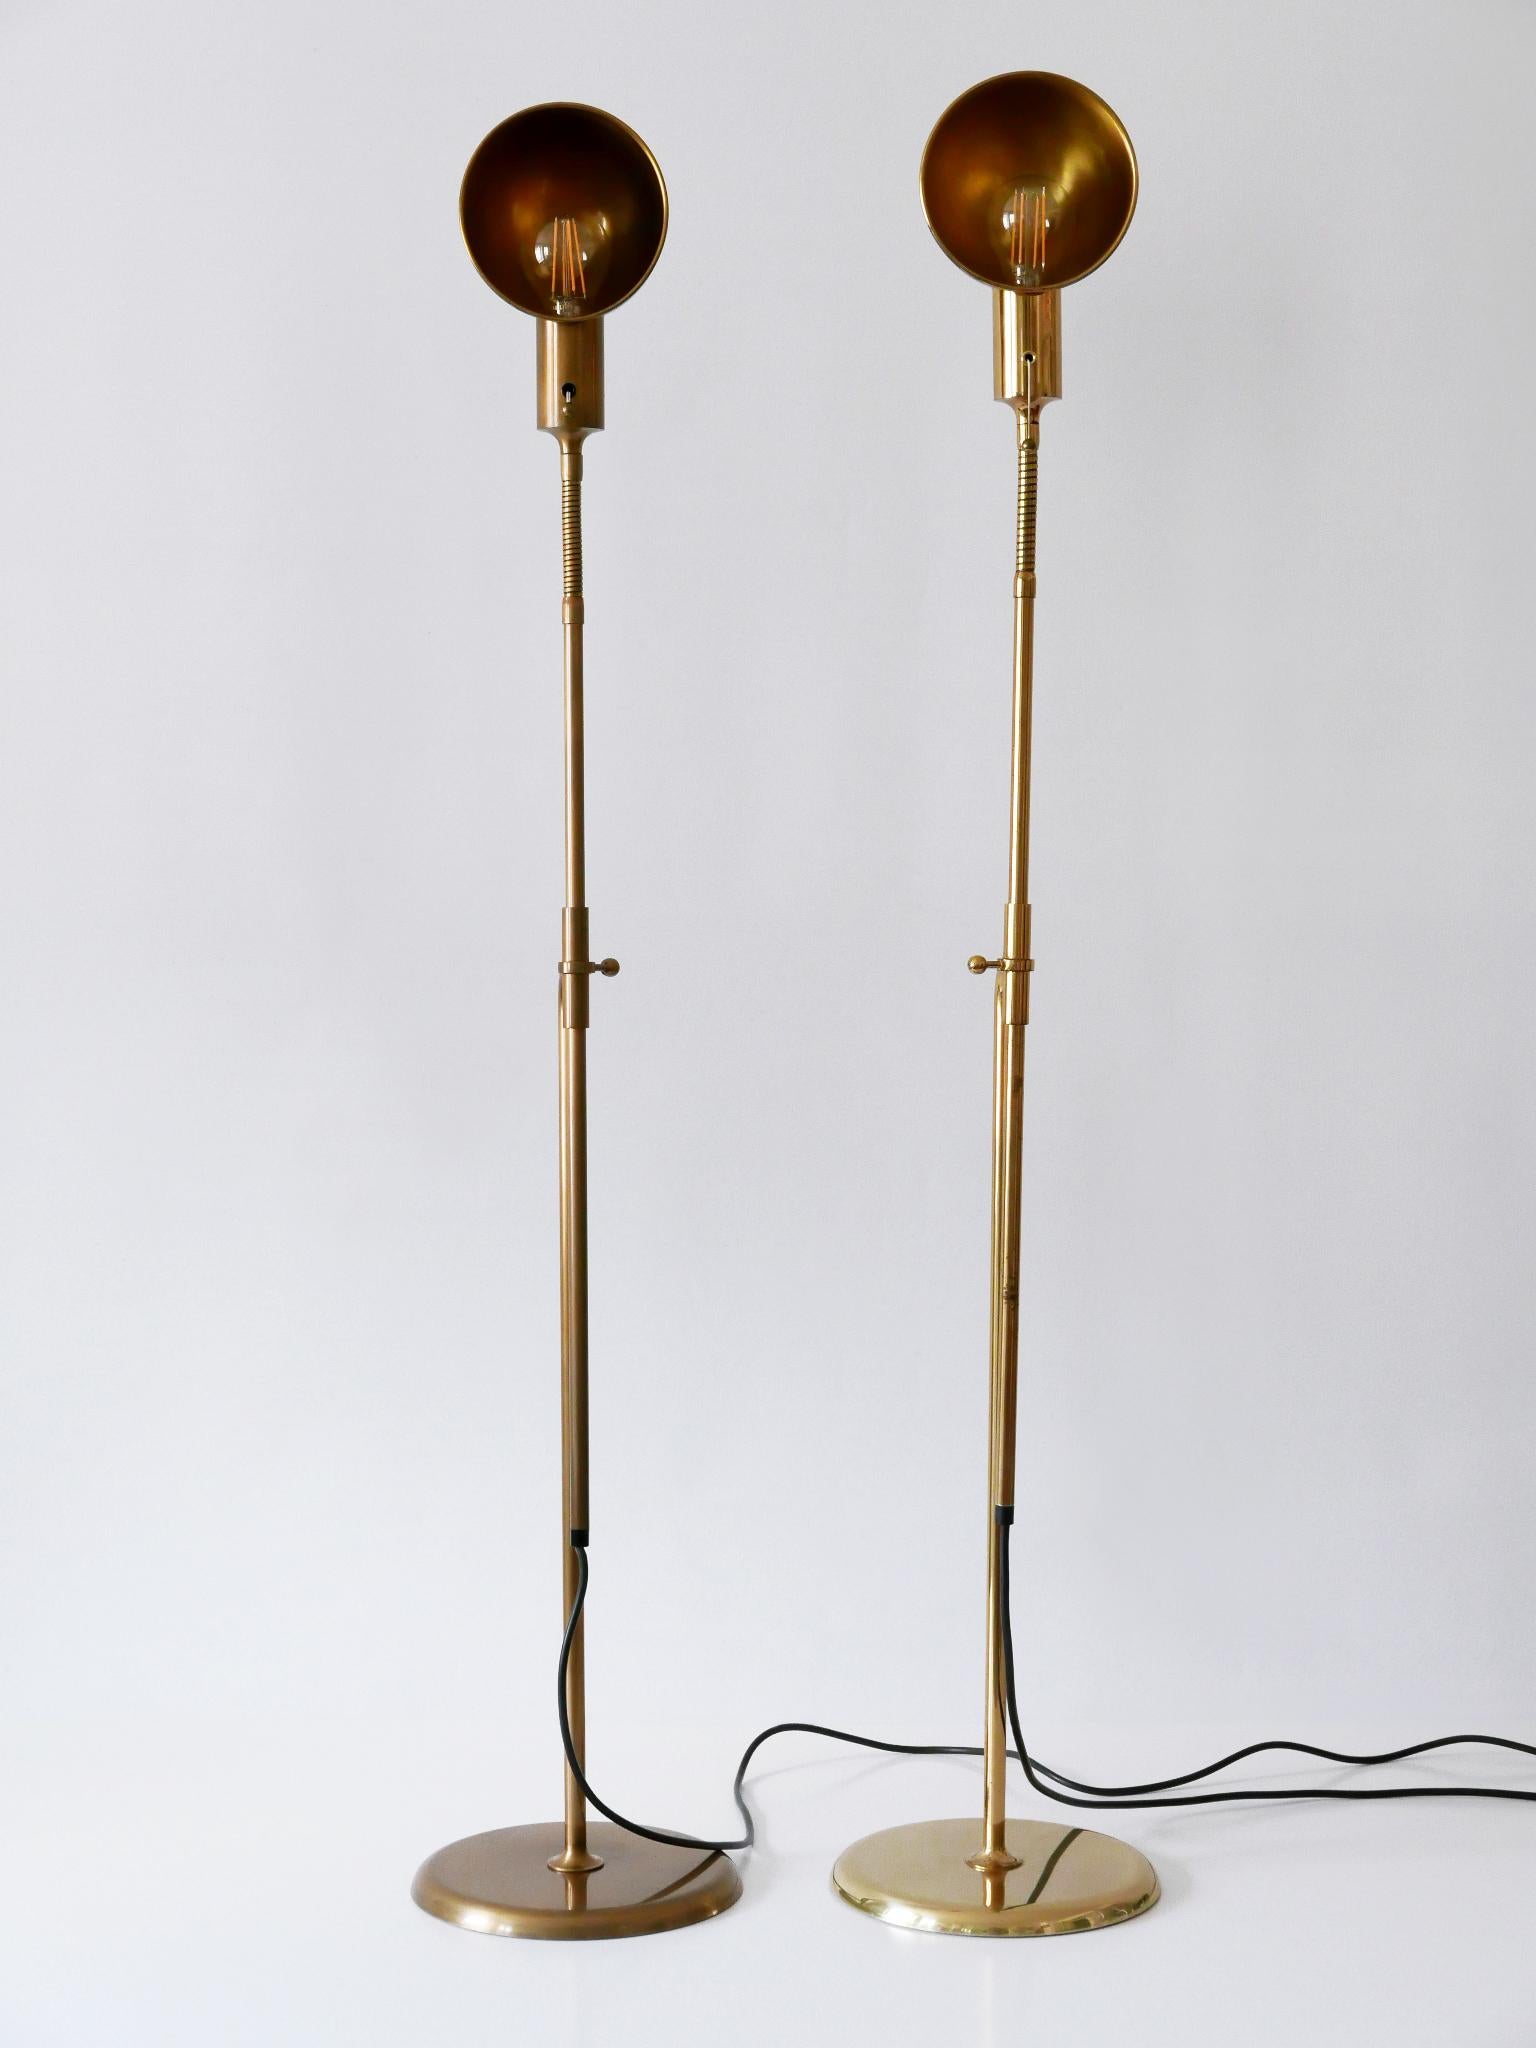 Set of Two Mid-Century Modern Reading Floor Lamps 'Bola' by Florian Schulz 1970s For Sale 8